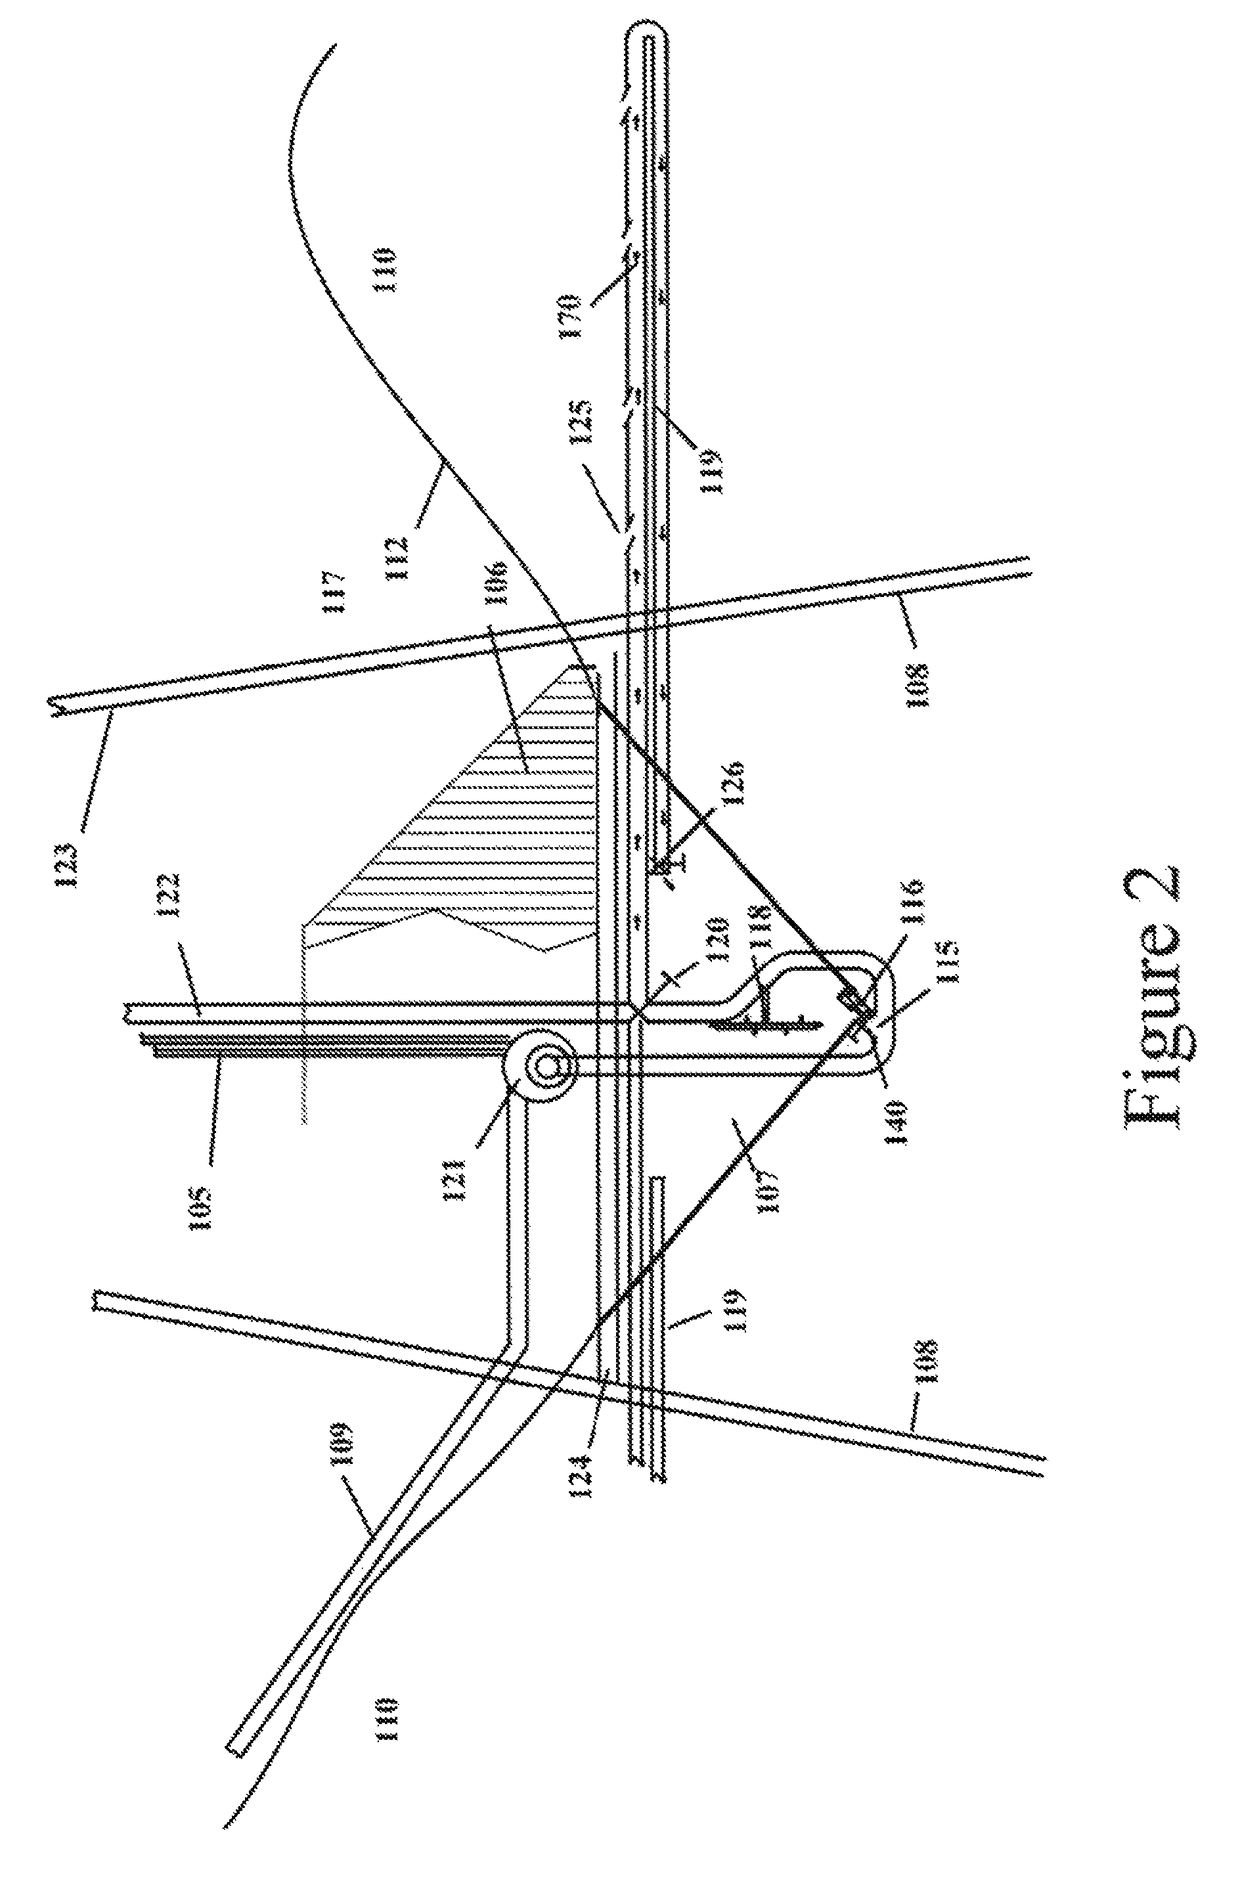 Sediment suction sink and method for sediment control in rivers, streams, and channels